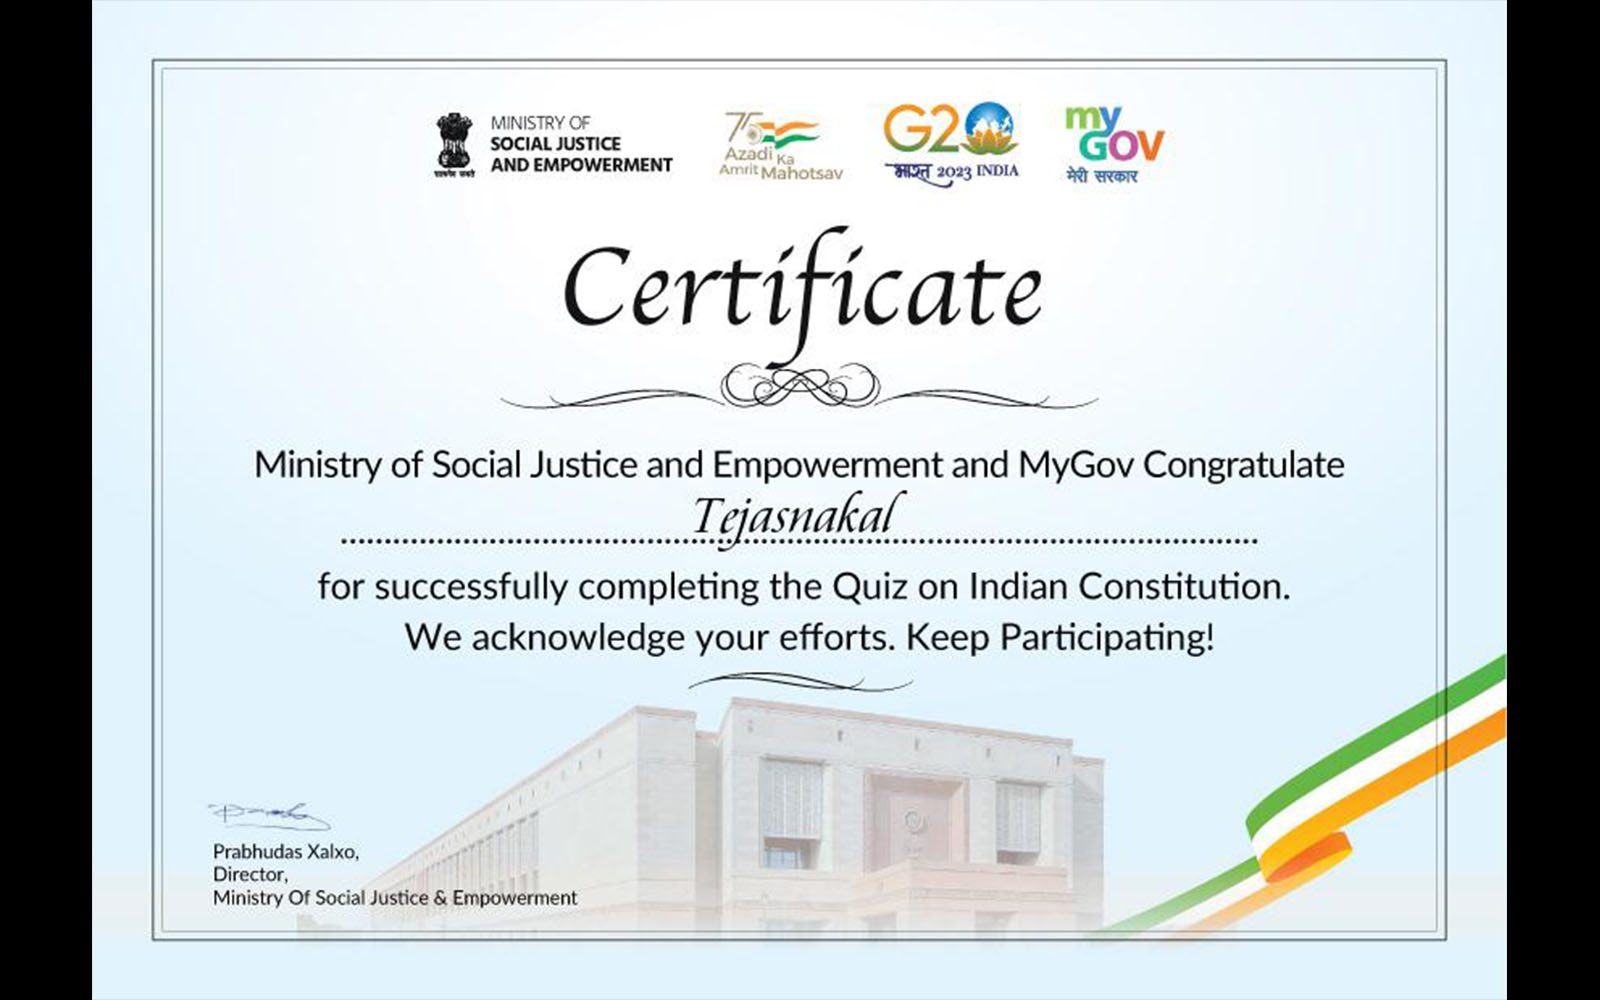 Indian Constitution Day Certificate 2